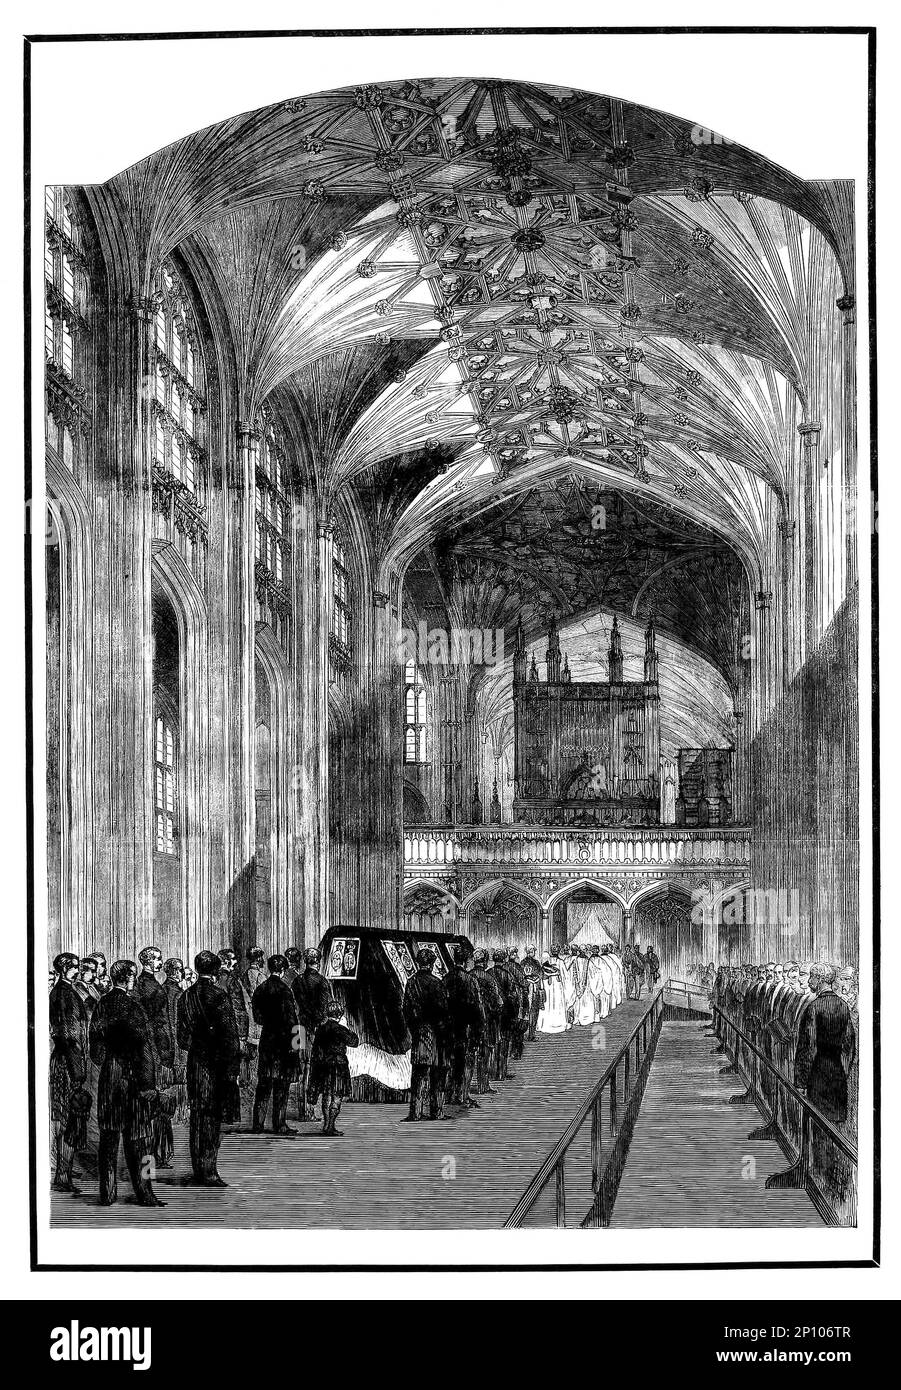 The royal procession in the nave of St George's Chapel in Windsor Castle, following the early death from Typhoid Fever of Prince Albert of Saxe-Coburg and Gotha (1819-1861),  consort of the British monarch as the husband of Queen Victoria. Stock Photo